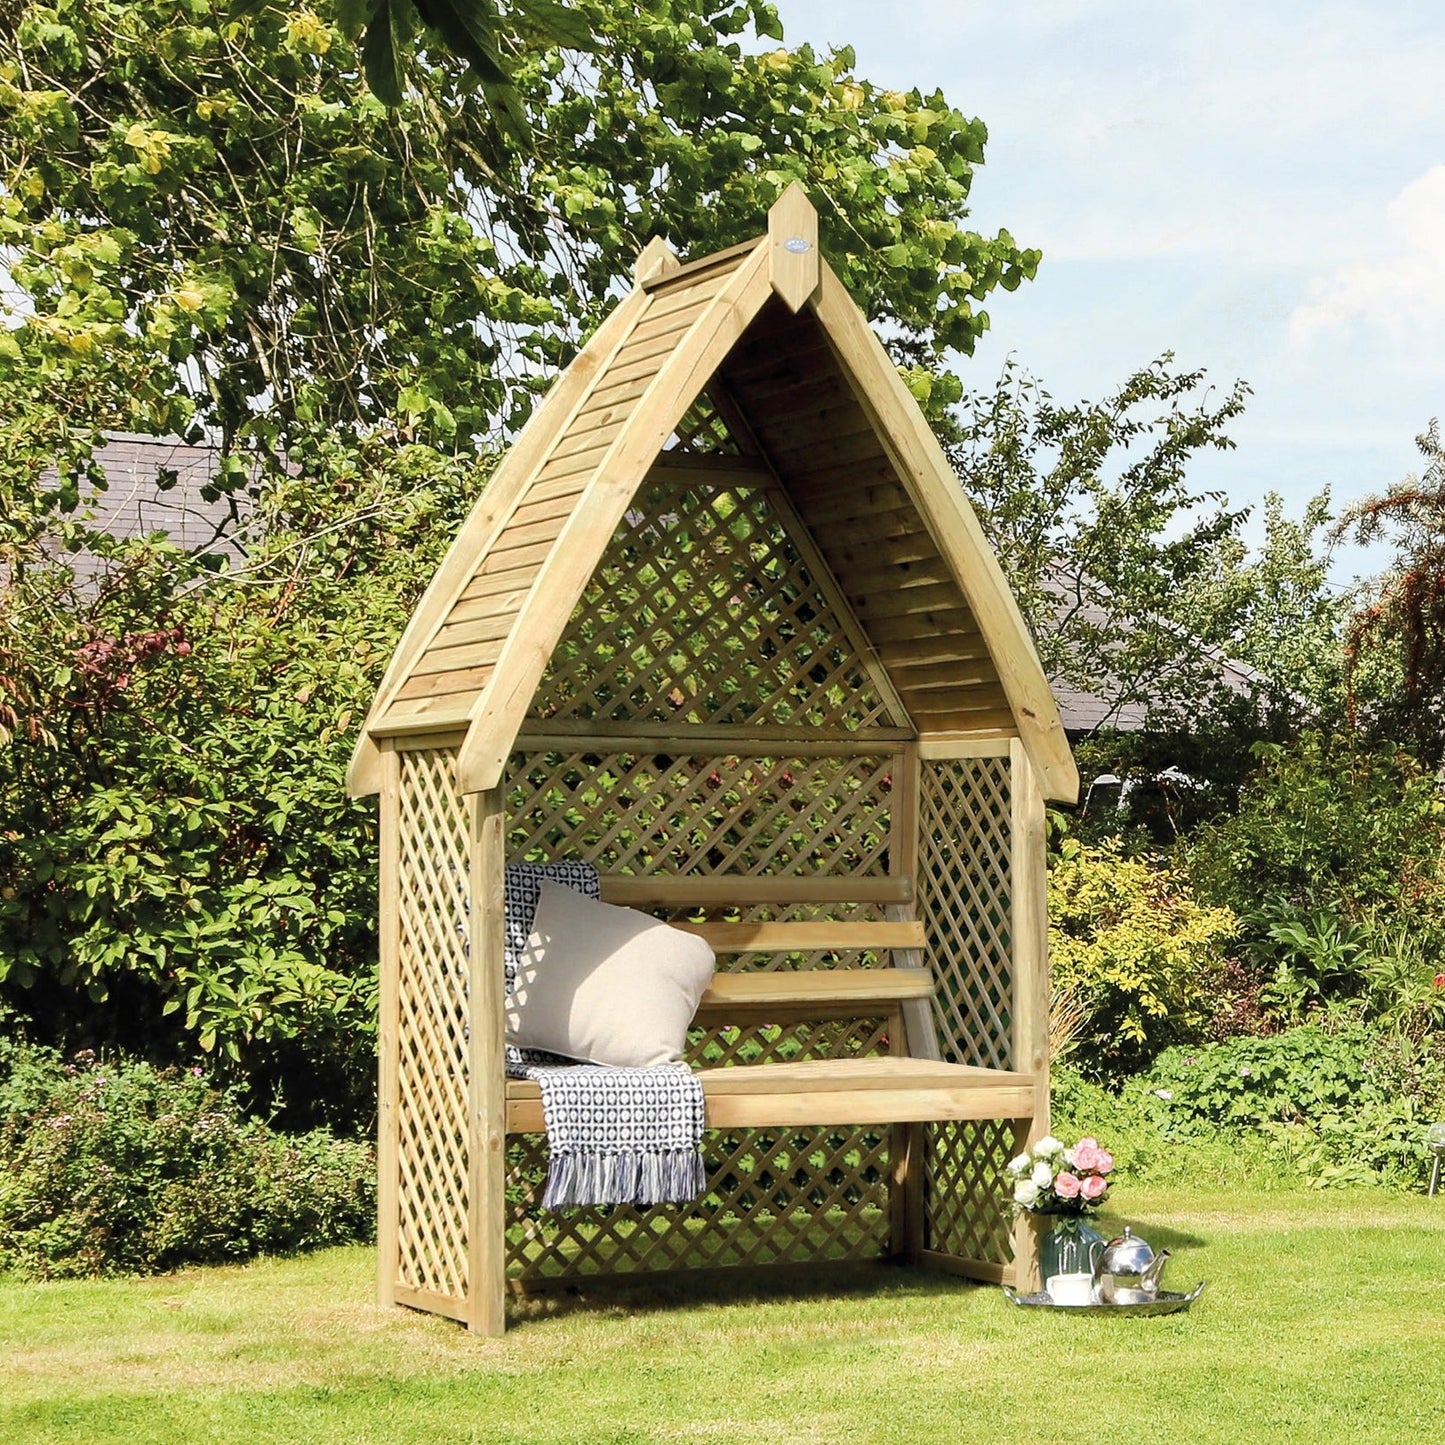 A Chepstow arbour surrounded by greenery, offering a charming seating area in the garden.